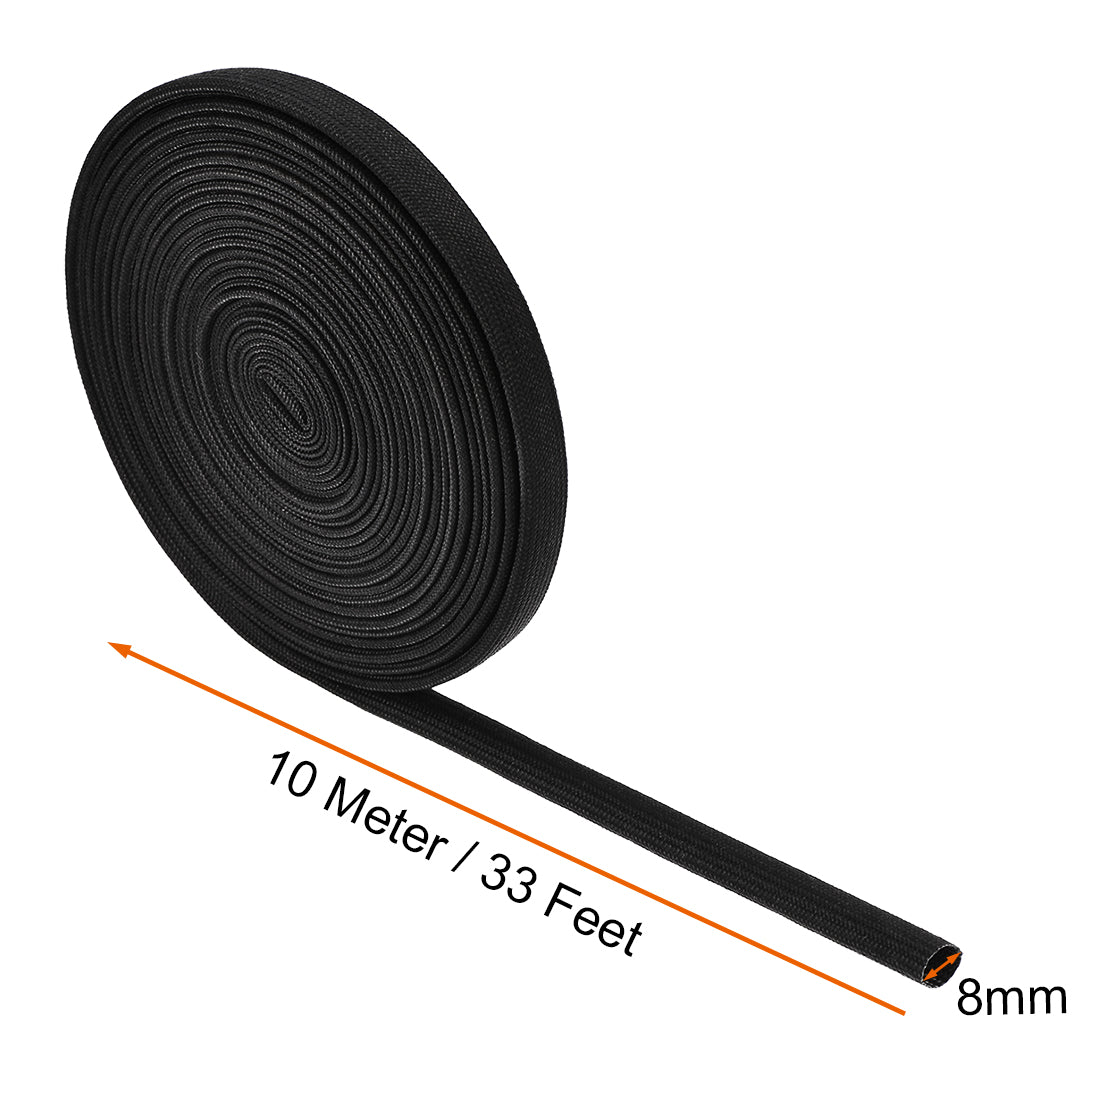 uxcell Uxcell Insulation Cable Protector, 33Ft-8mm High TEMP Silicone Fiberglass Sleeve Black